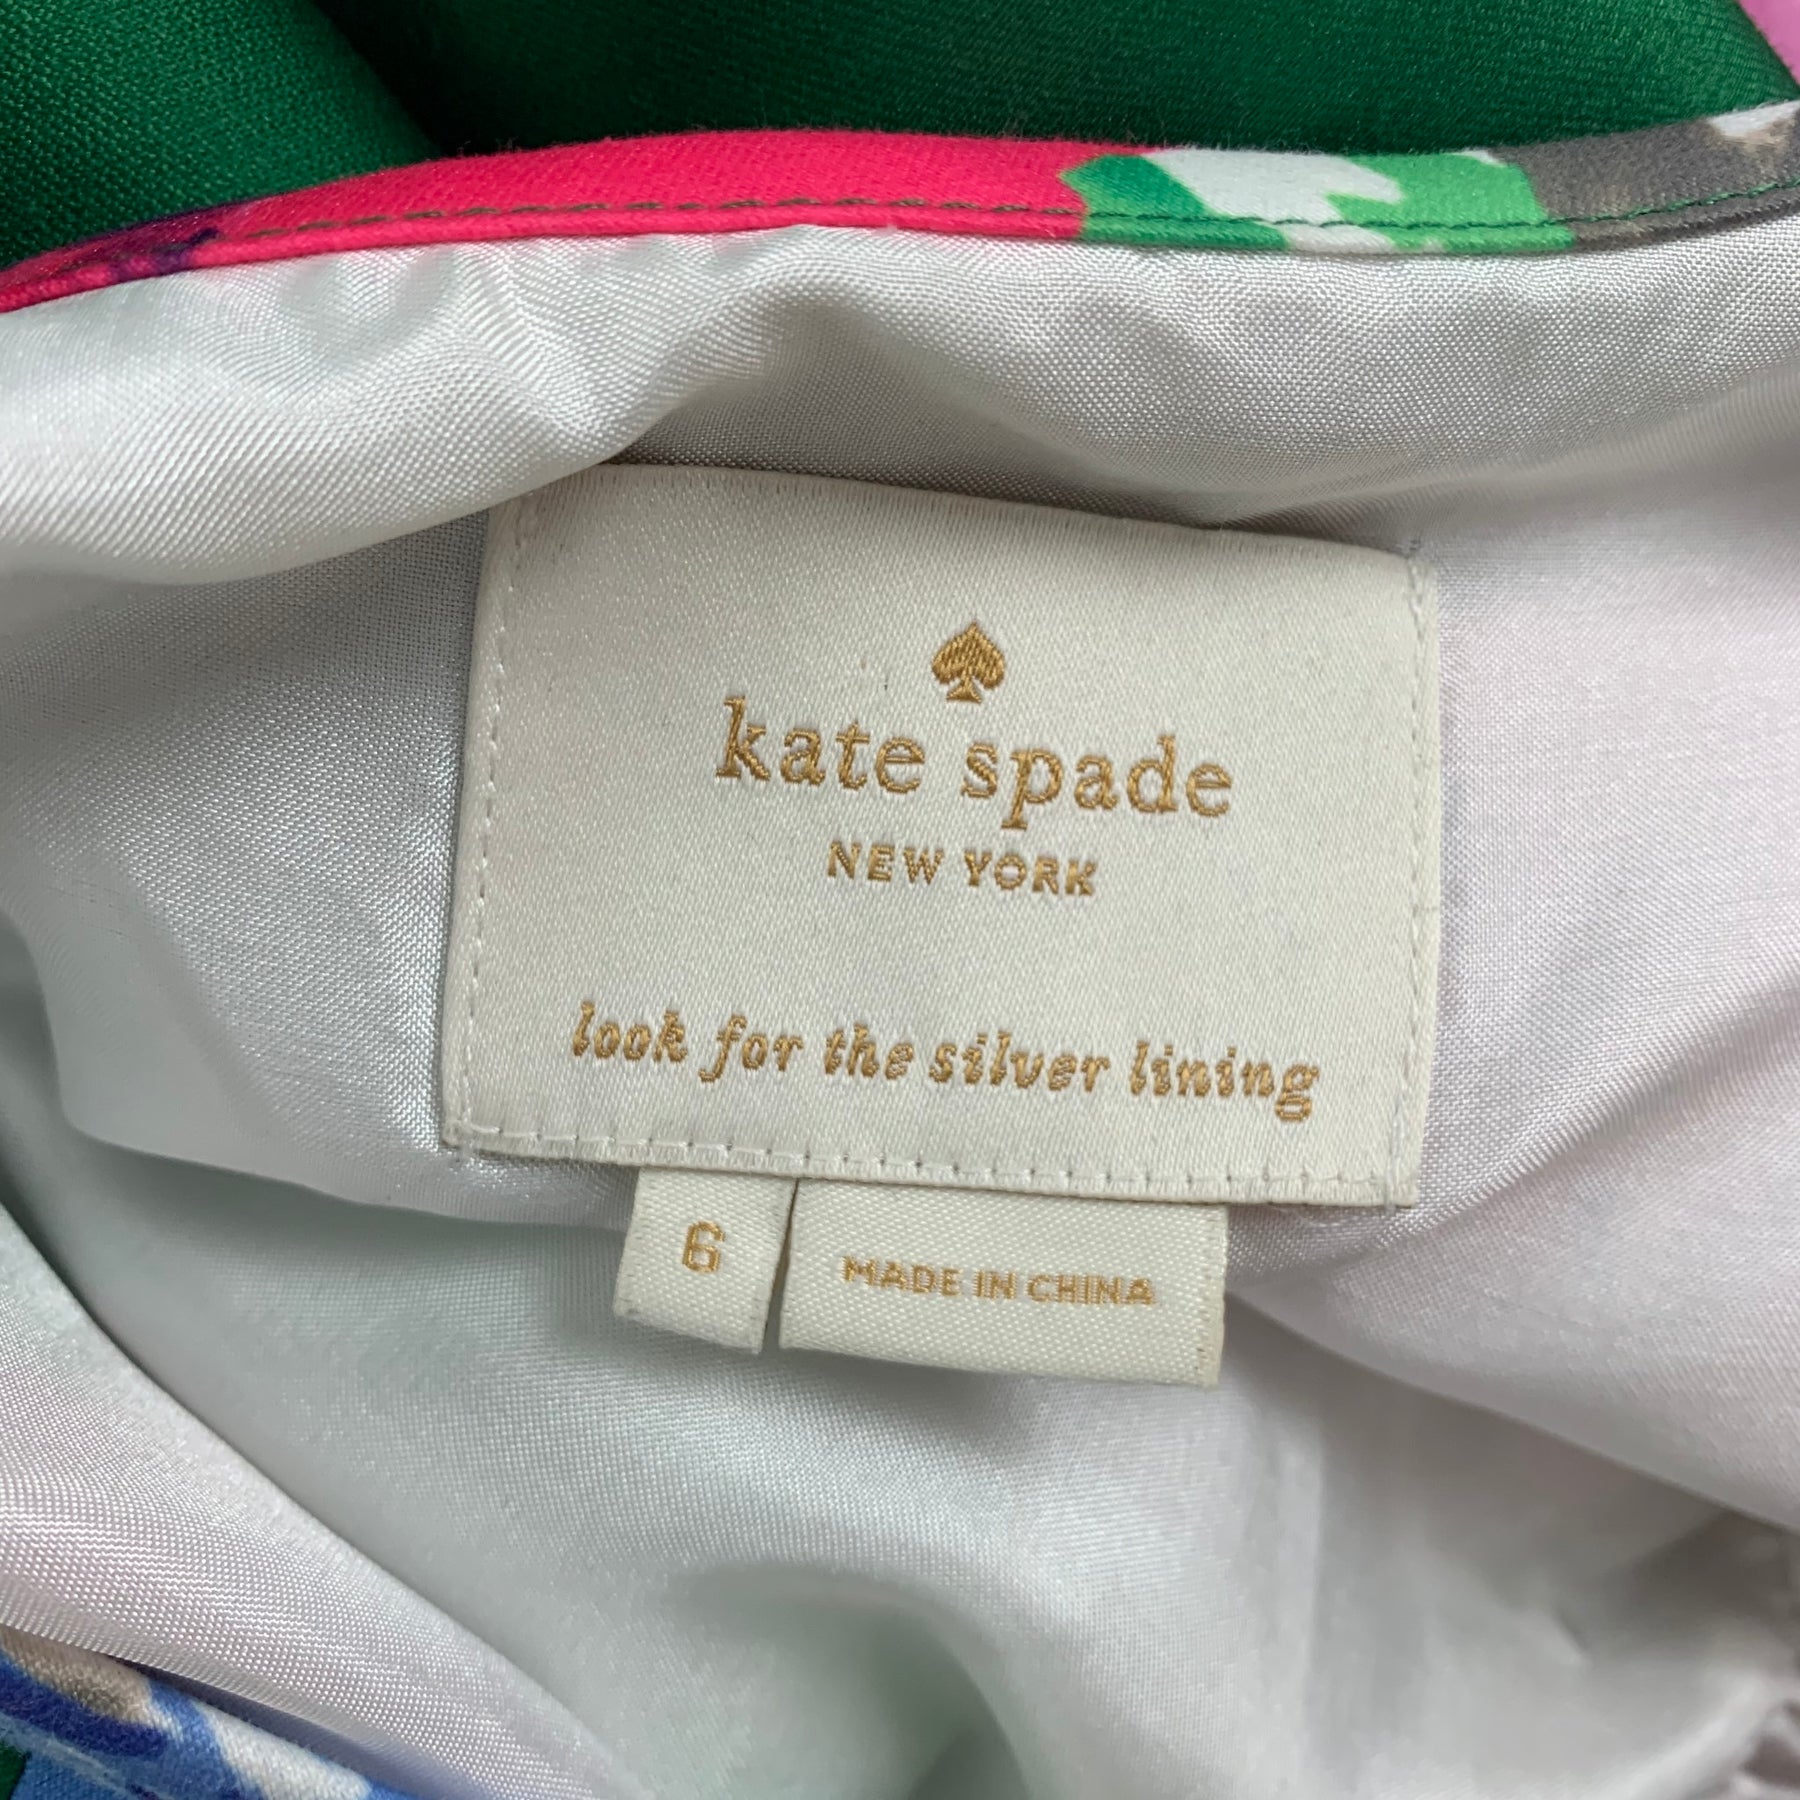 Kate Spade New York On Sale - Authenticated Resale